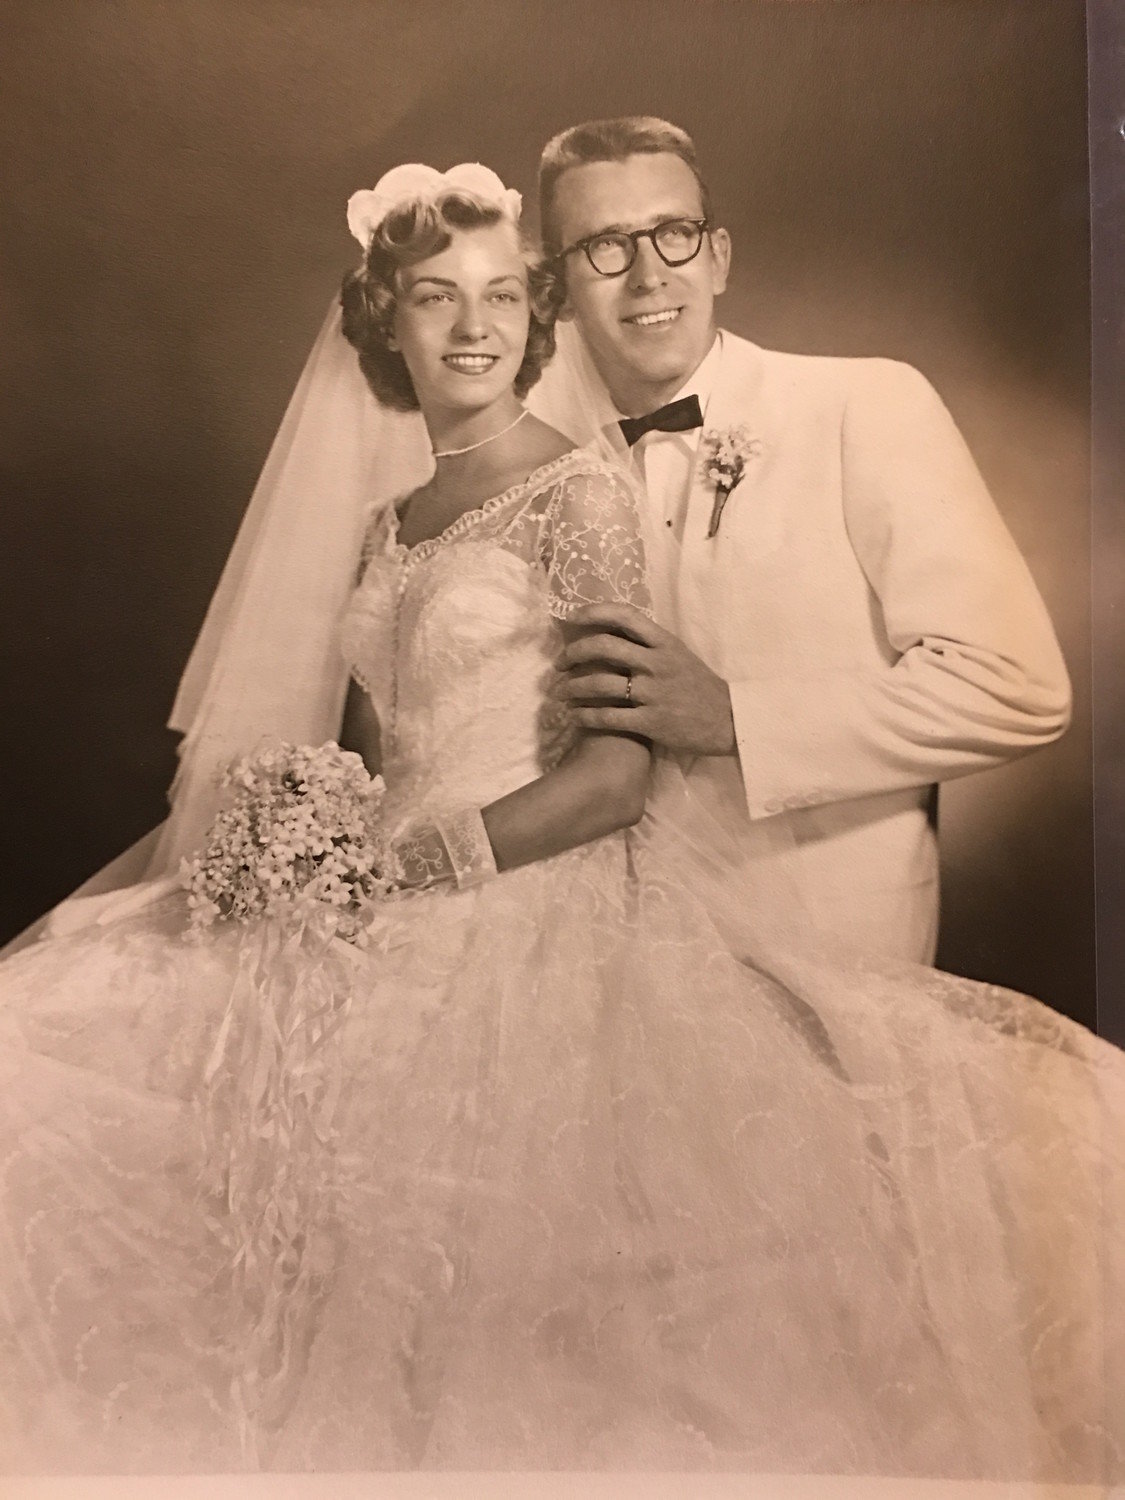 Diane and Frank Januszewski were happily married for 61 years.